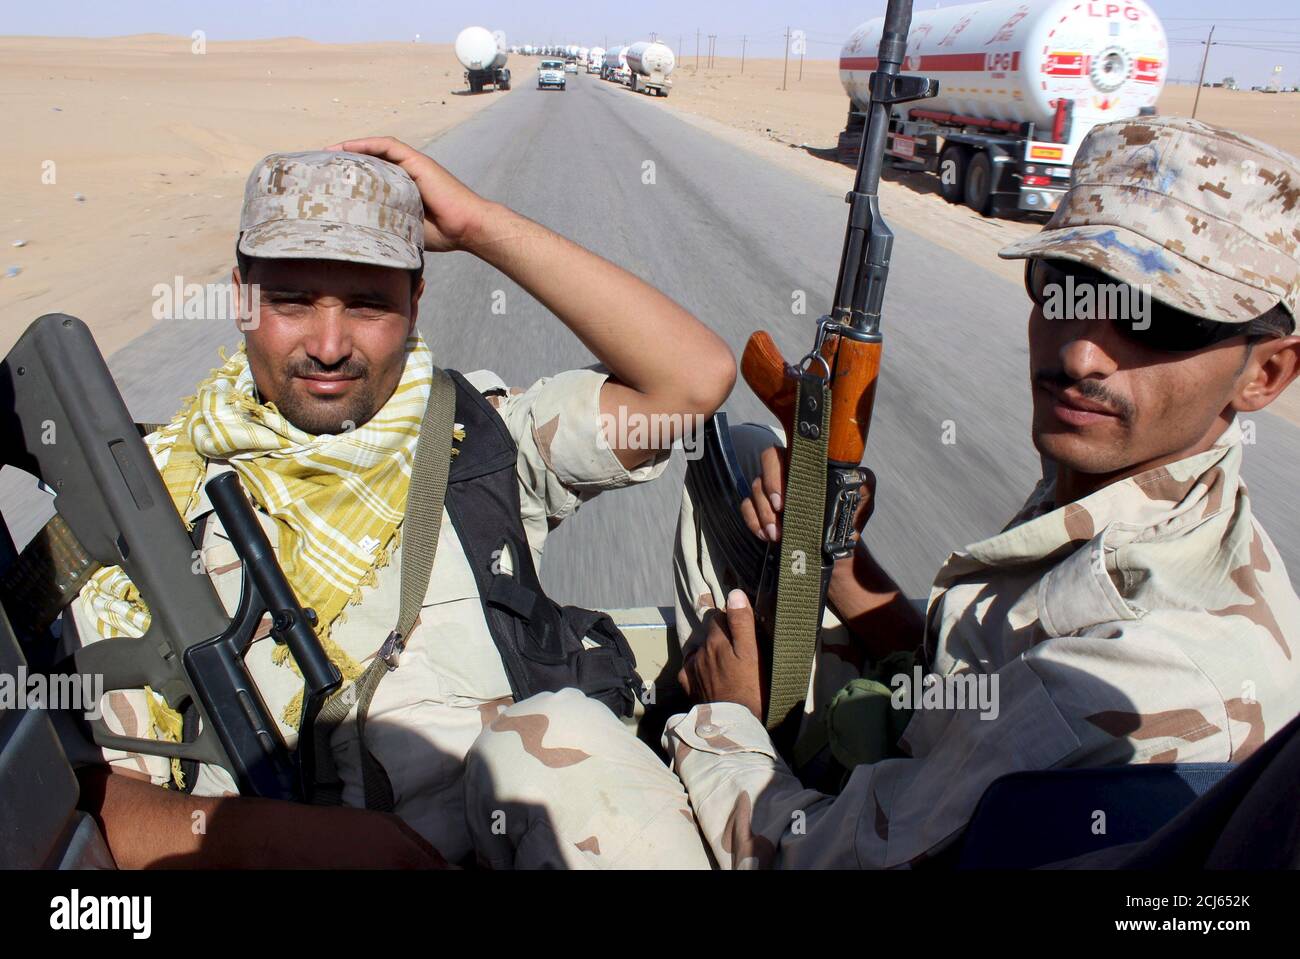 Yemeni soldiers trained by Saudi Arabia drive past empty gas tankers near the Marib oil fields, Yemen October 15, 2015. Marib is a city that is heavily armed even by the standards of Yemen, where the ready availability of weapons helped start civil war and is now preventing anyone coming out on top. Yemenis often say there are three guns for every person, a boast that has become an urgent concern in a country where the United Nations says the humanitarian situation is 'critical'. Picture taken October 15, 2015. REUTERS/Angus McDowall Stock Photo